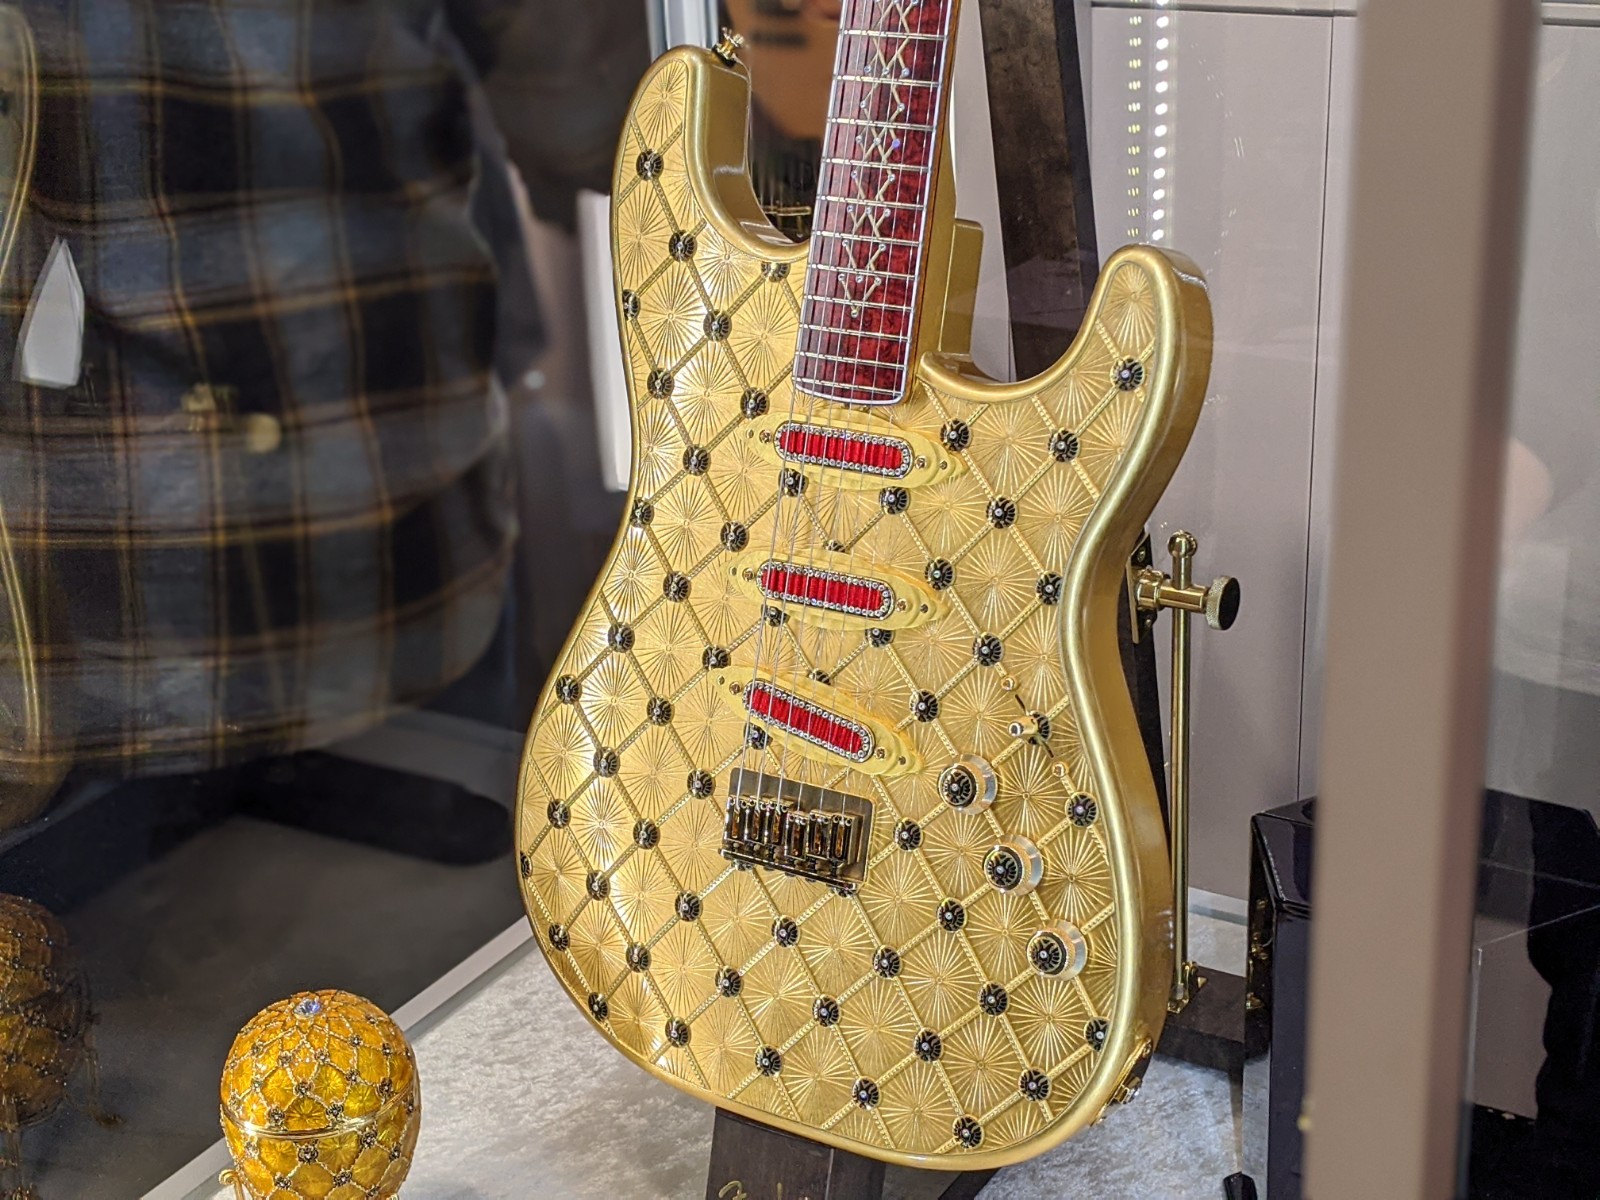 NAMM 2020: The $560,000 Coronation Stratocaster leads Fender's jaw